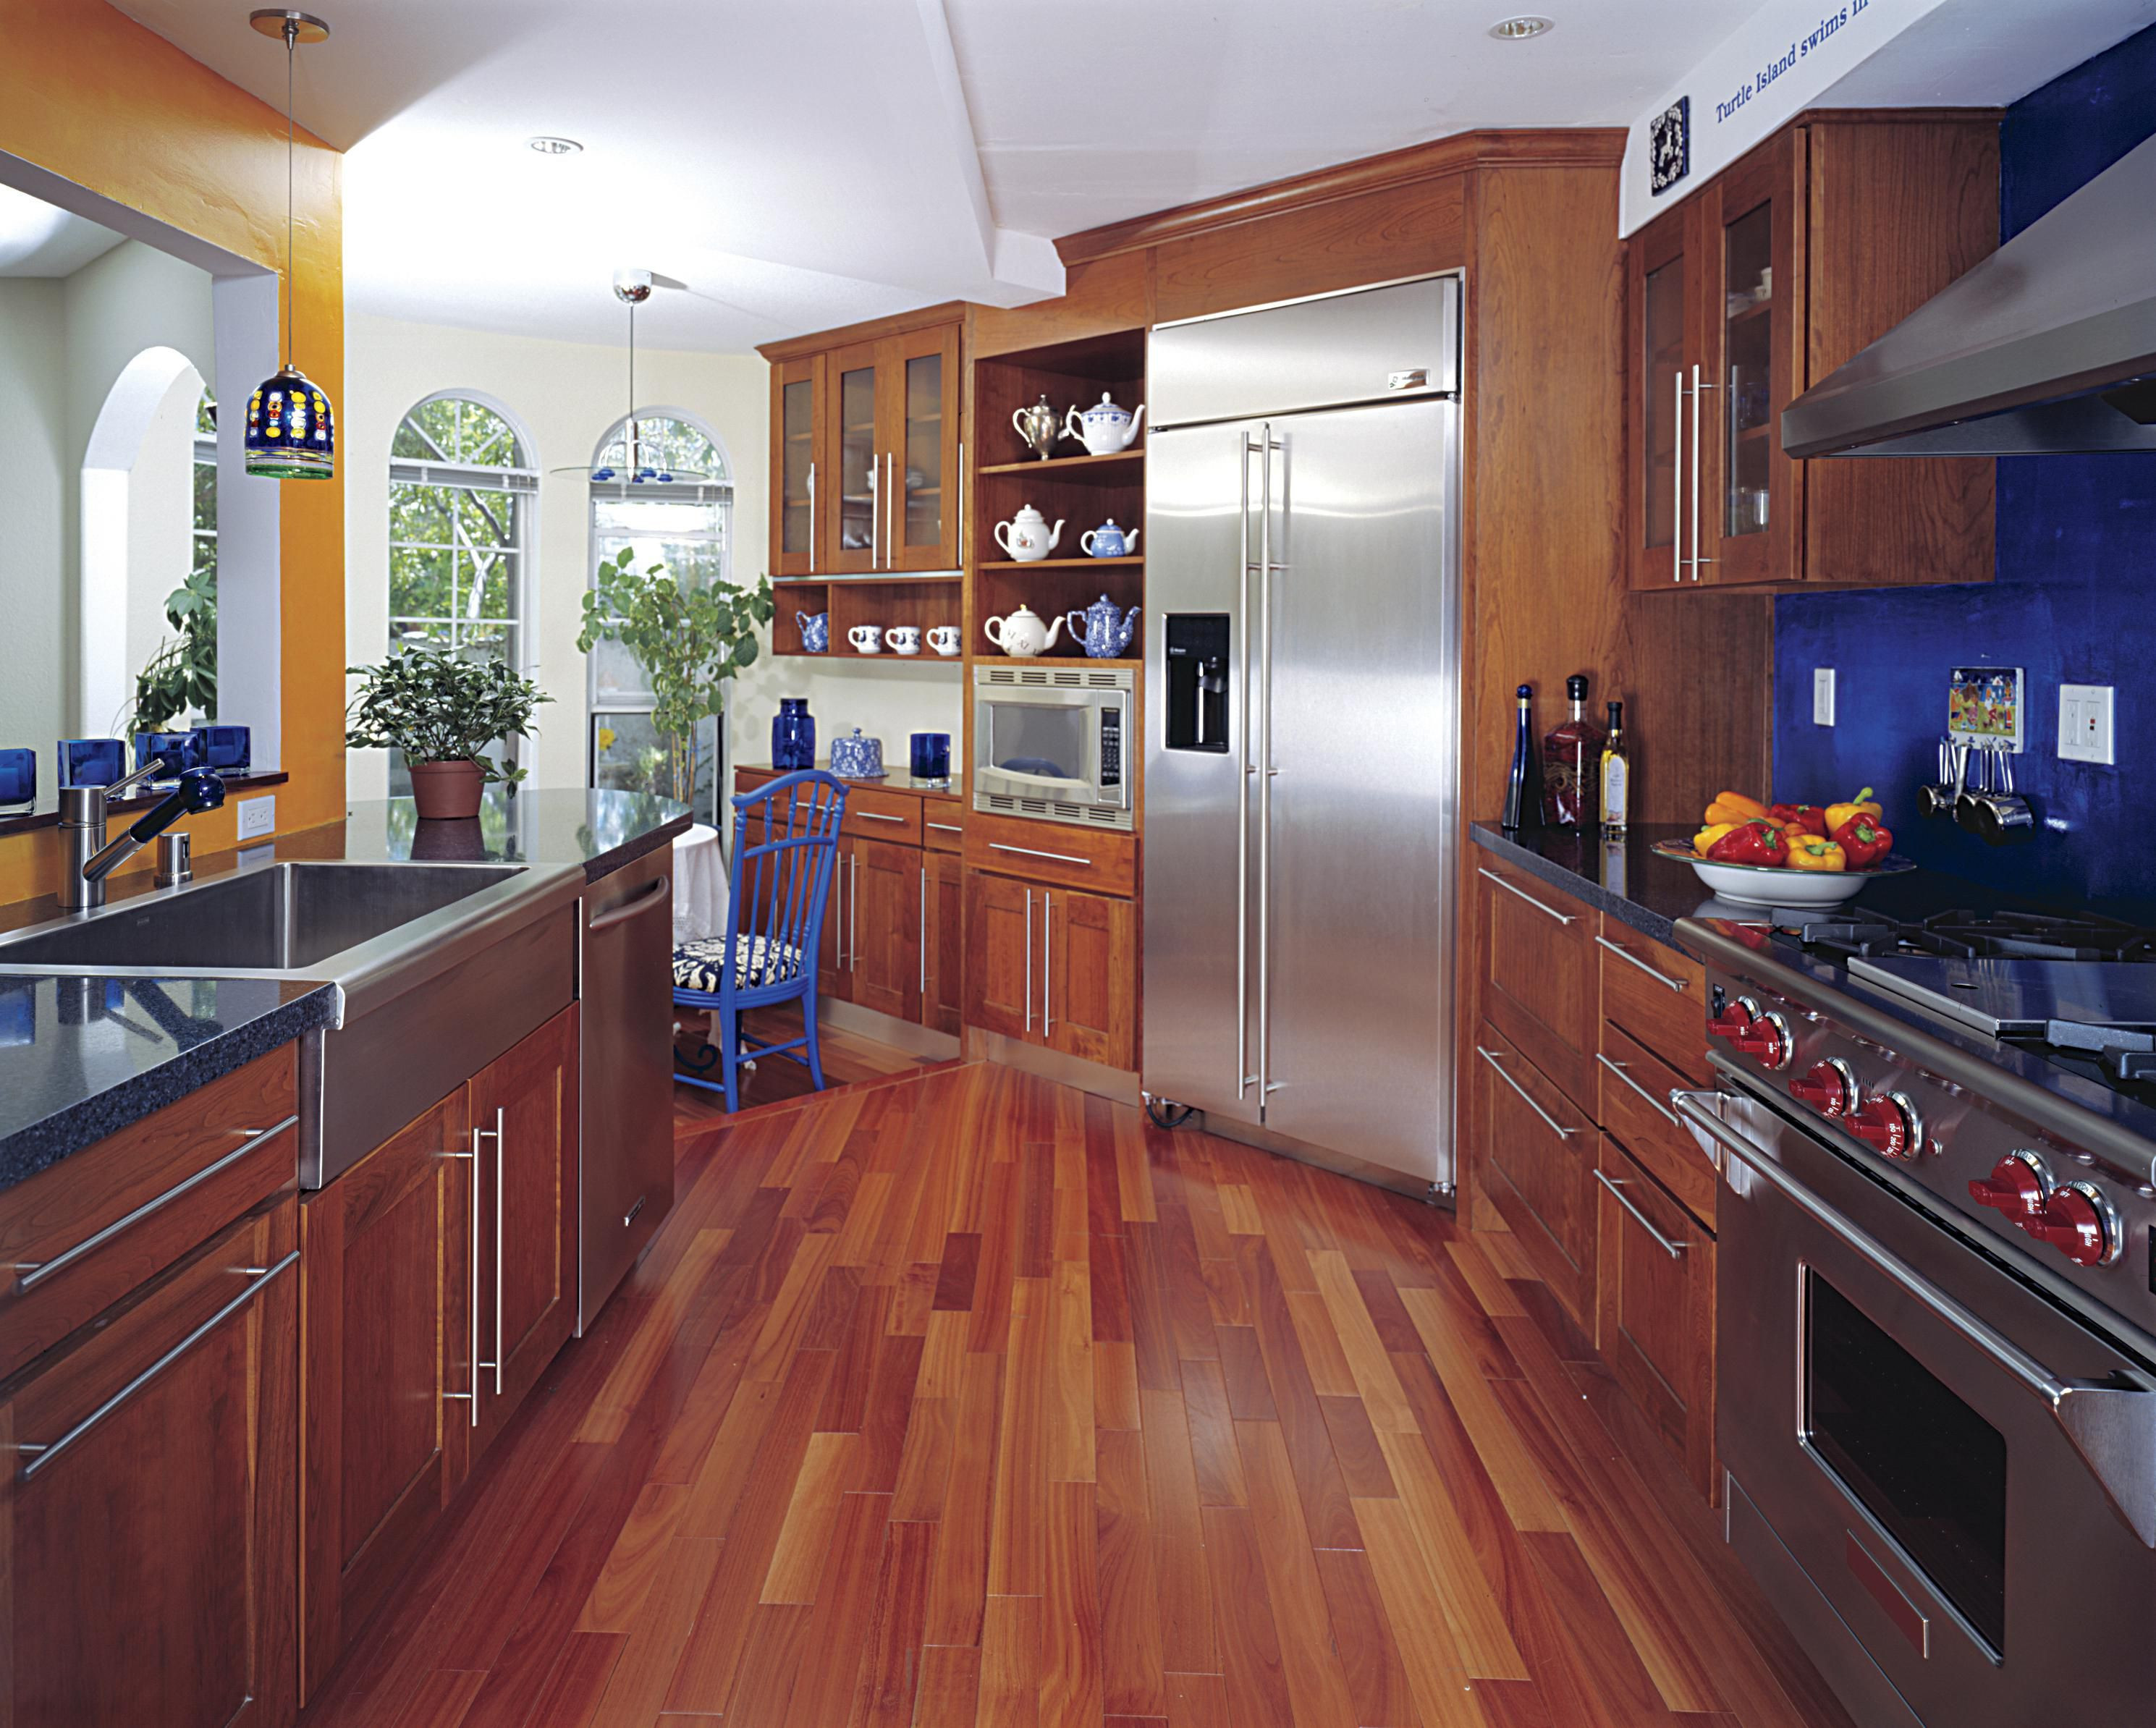 staining hardwood floors this old house of hardwood floor in a kitchen is this allowed with regard to 186828472 56a49f3a5f9b58b7d0d7e142